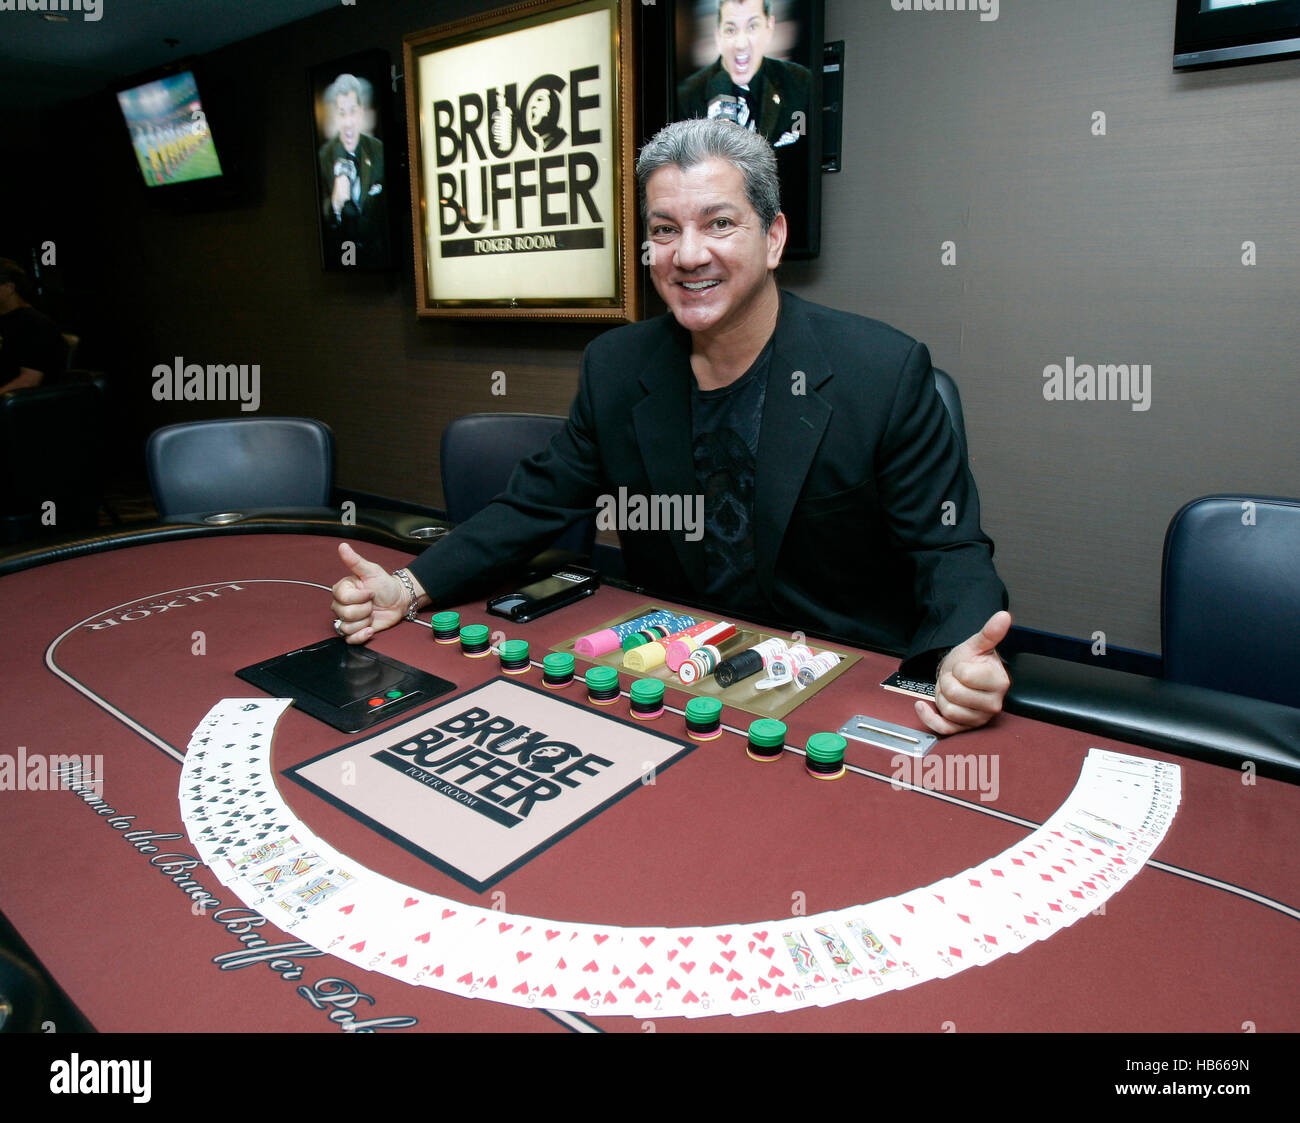 UFC announcer Bruce Buffer at the opening of the Bruce Buffer Poker Room at  the Luxor Hotel on July 2, 2010, in Las Vegas, Nevada. Photo by Francis  Specker Stock Photo - Alamy